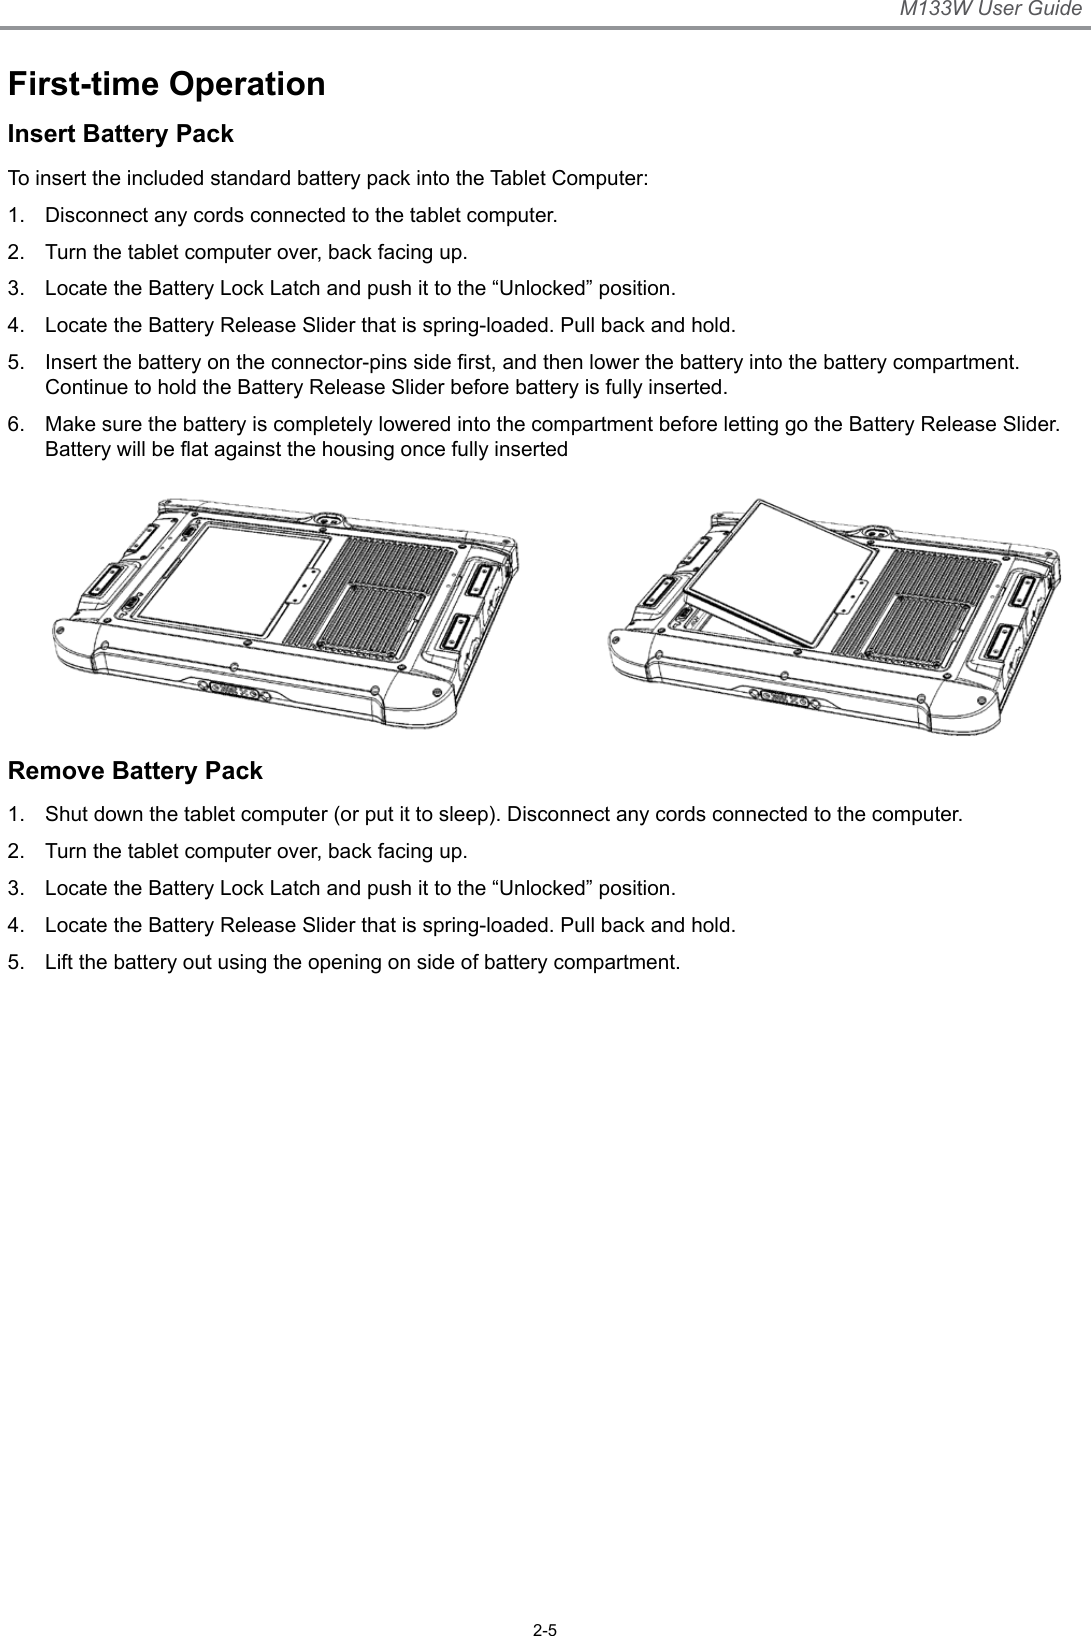 M133W User Guide2-5First-time OperationInsert Battery PackTo insert the included standard battery pack into the Tablet Computer:1.  Disconnect any cords connected to the tablet computer.2.  Turn the tablet computer over, back facing up.3.  Locate the Battery Lock Latch and push it to the “Unlocked” position.4.  Locate the Battery Release Slider that is spring-loaded. Pull back and hold.5.  Insert the battery on the connector-pins side rst, and then lower the battery into the battery compartment. Continue to hold the Battery Release Slider before battery is fully inserted.6.  Make sure the battery is completely lowered into the compartment before letting go the Battery Release Slider. Battery will be at against the housing once fully insertedRemove Battery Pack1.  Shut down the tablet computer (or put it to sleep). Disconnect any cords connected to the computer.2.  Turn the tablet computer over, back facing up.3.  Locate the Battery Lock Latch and push it to the “Unlocked” position.4.  Locate the Battery Release Slider that is spring-loaded. Pull back and hold.5.  Lift the battery out using the opening on side of battery compartment. 